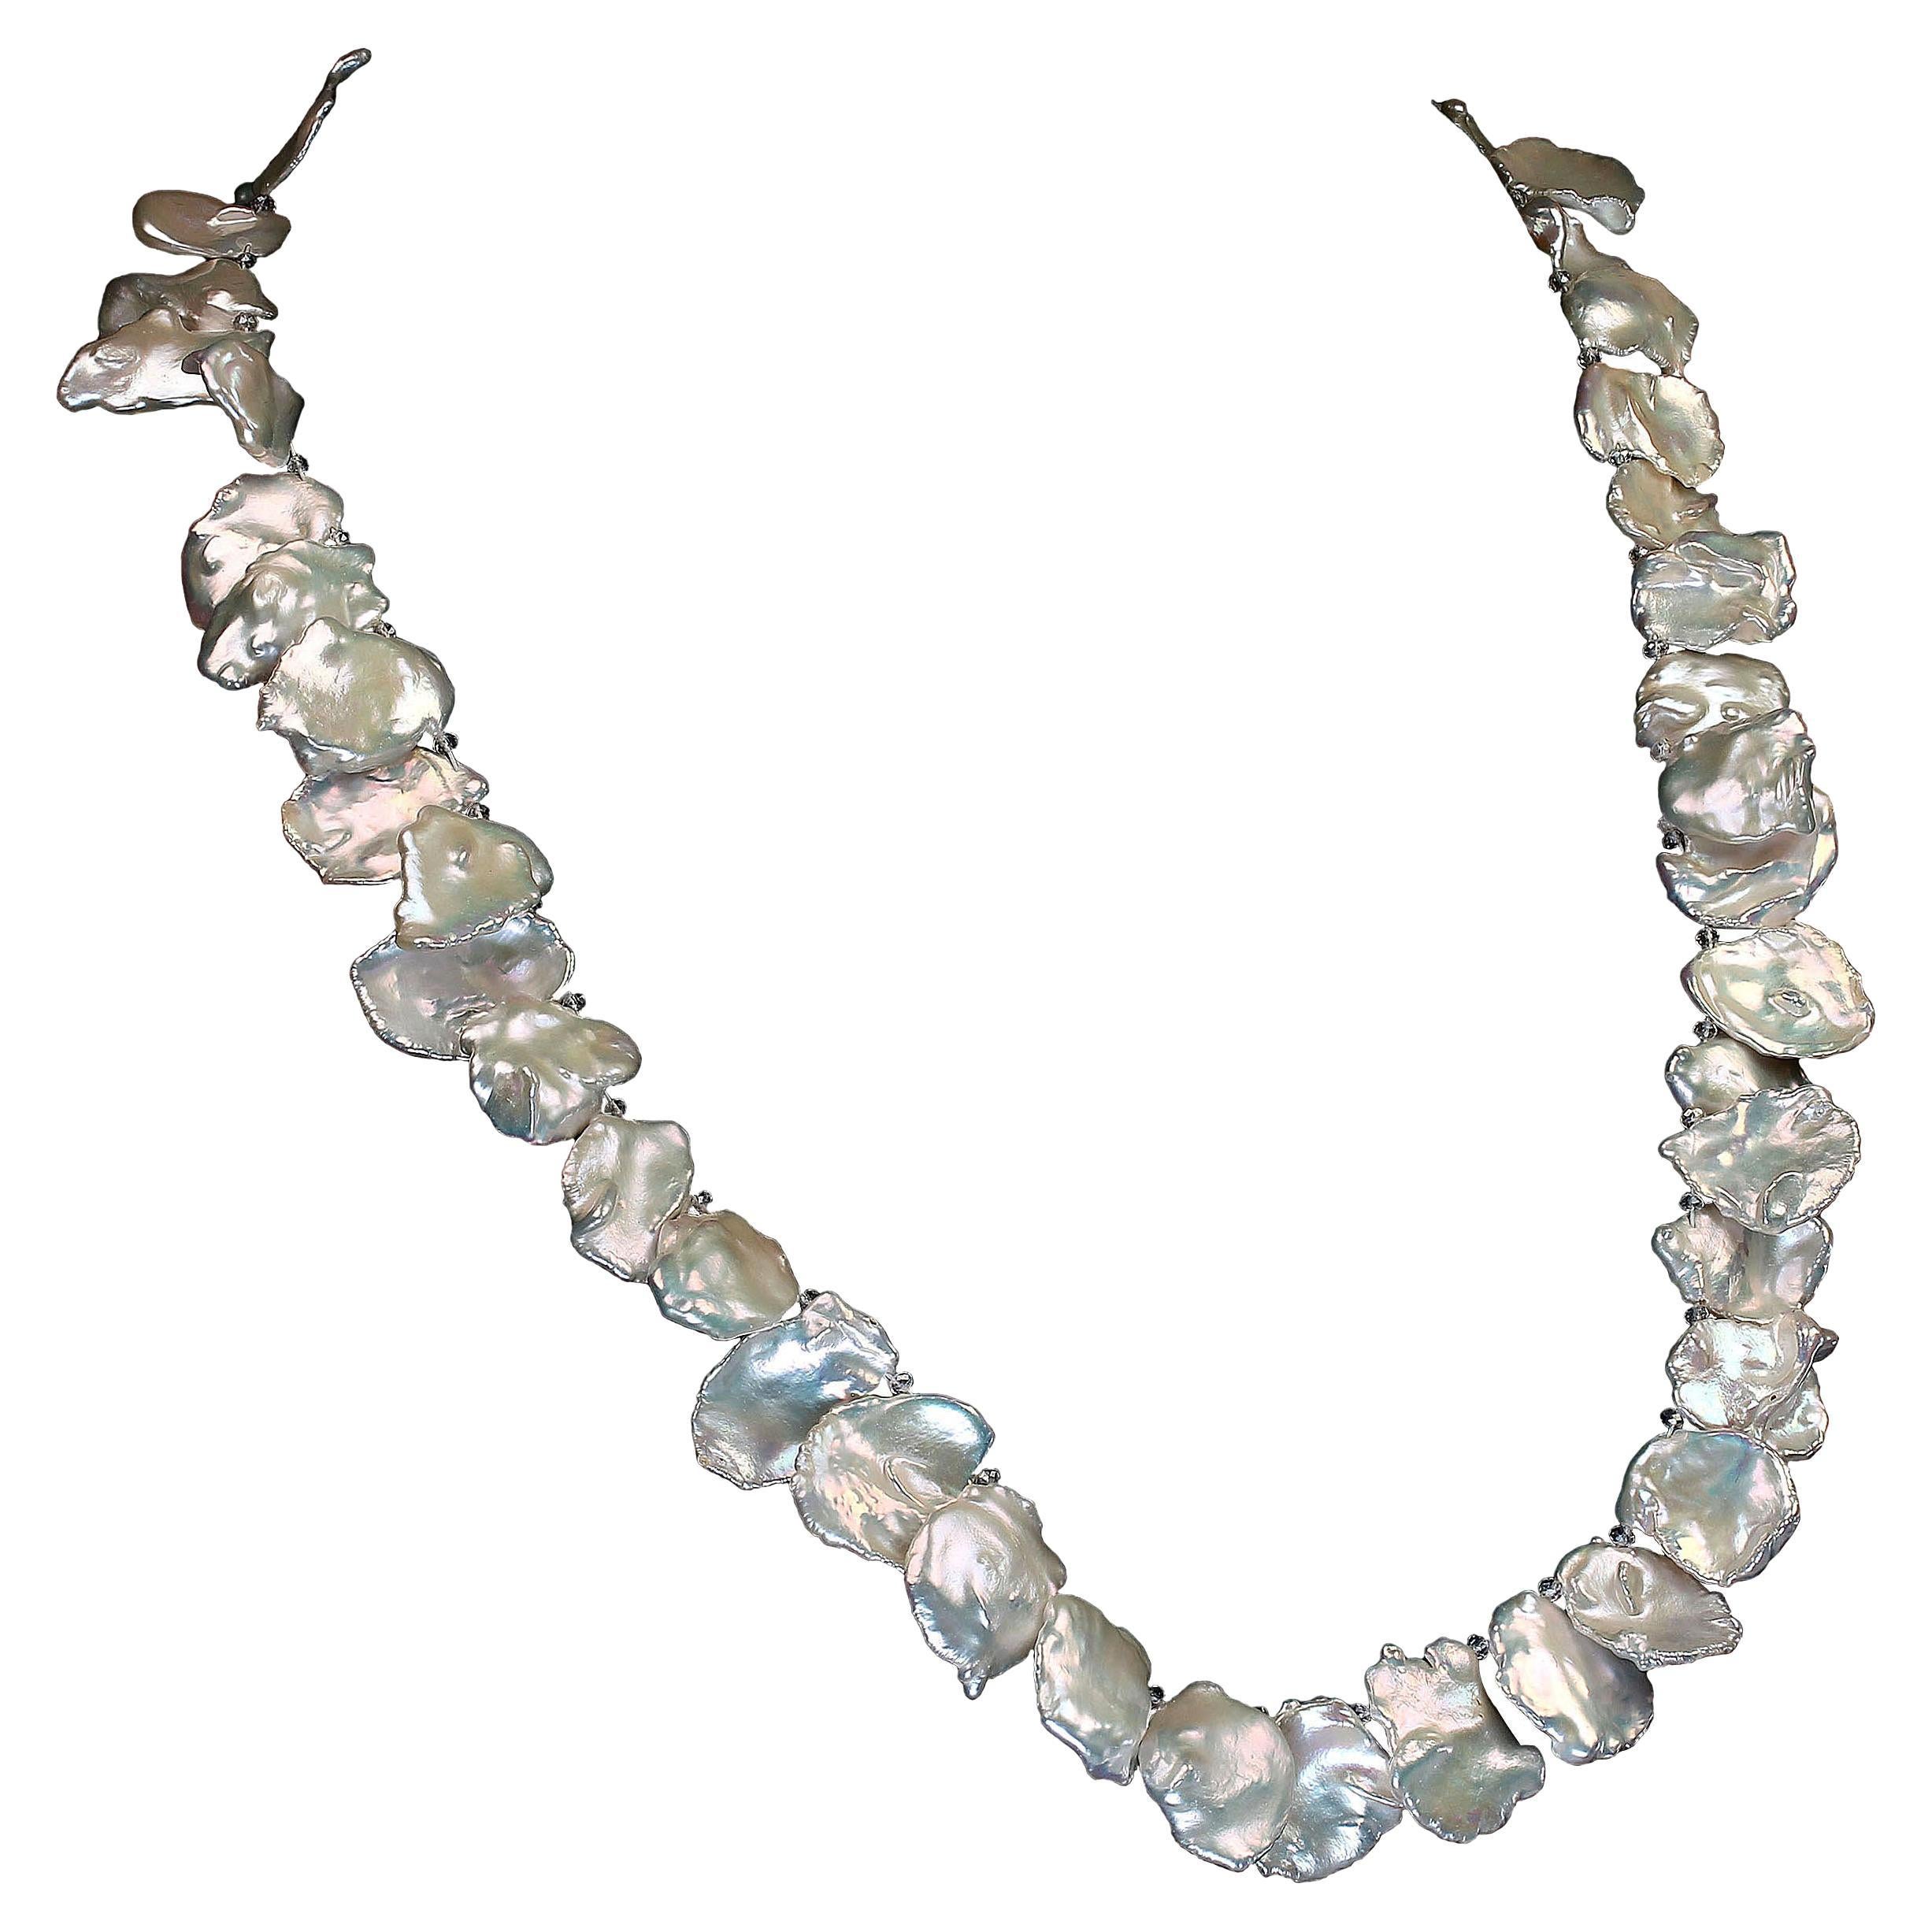 Own the jewelry you desire

Stunning, white, iridescent, graduated Keshi pearl necklace with Silver Topaz accents. This unique 26 inch necklace features Keshi pearls which resemble corn flakes up to 20mm.  This one of a kind, handmade necklace is